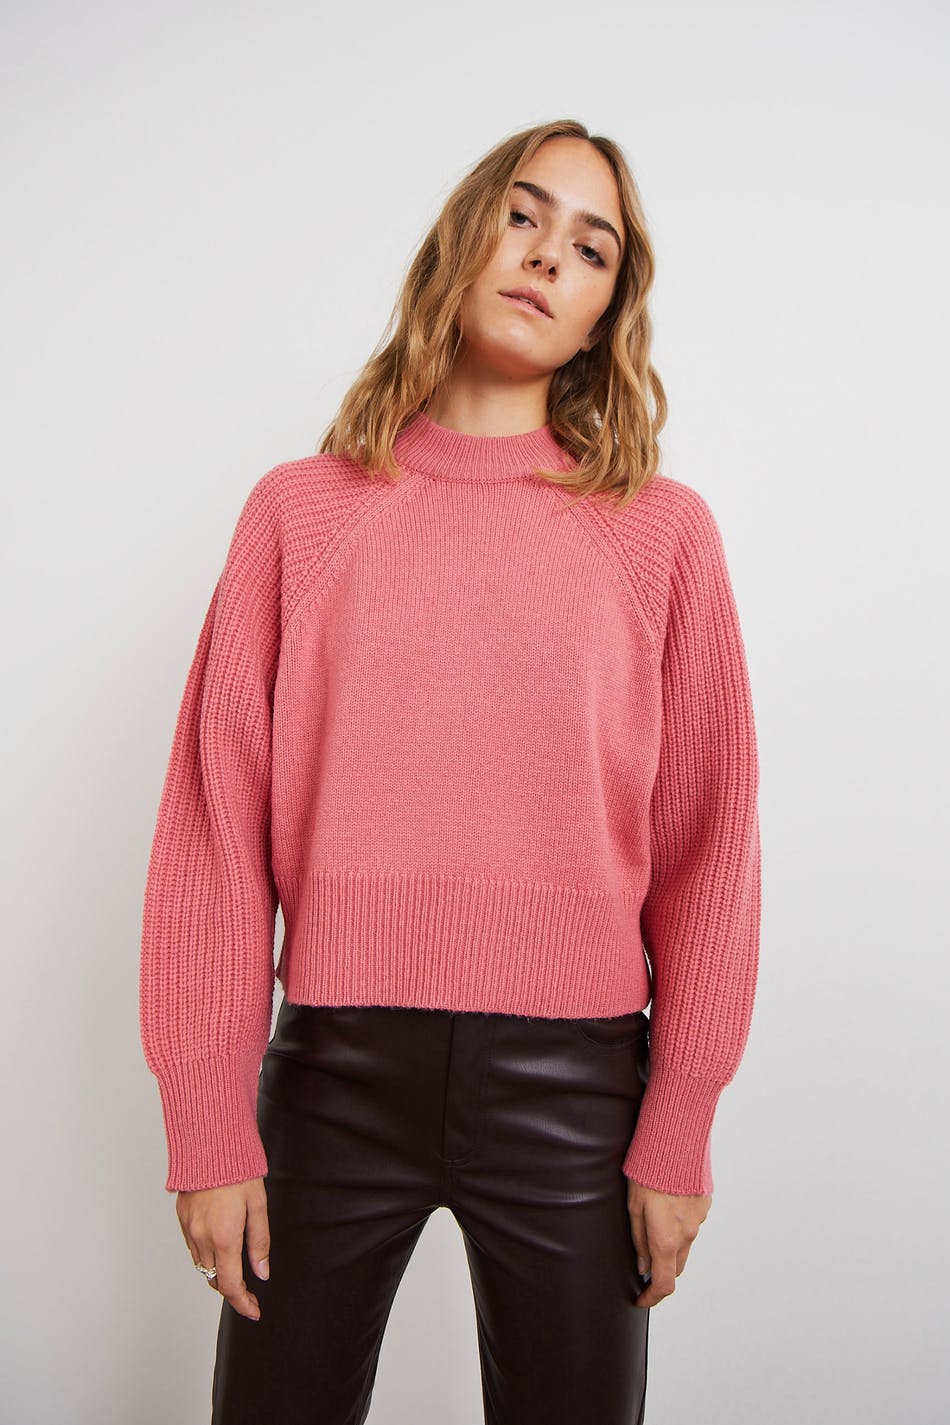 Bella knitted sweater, Gina Tricot